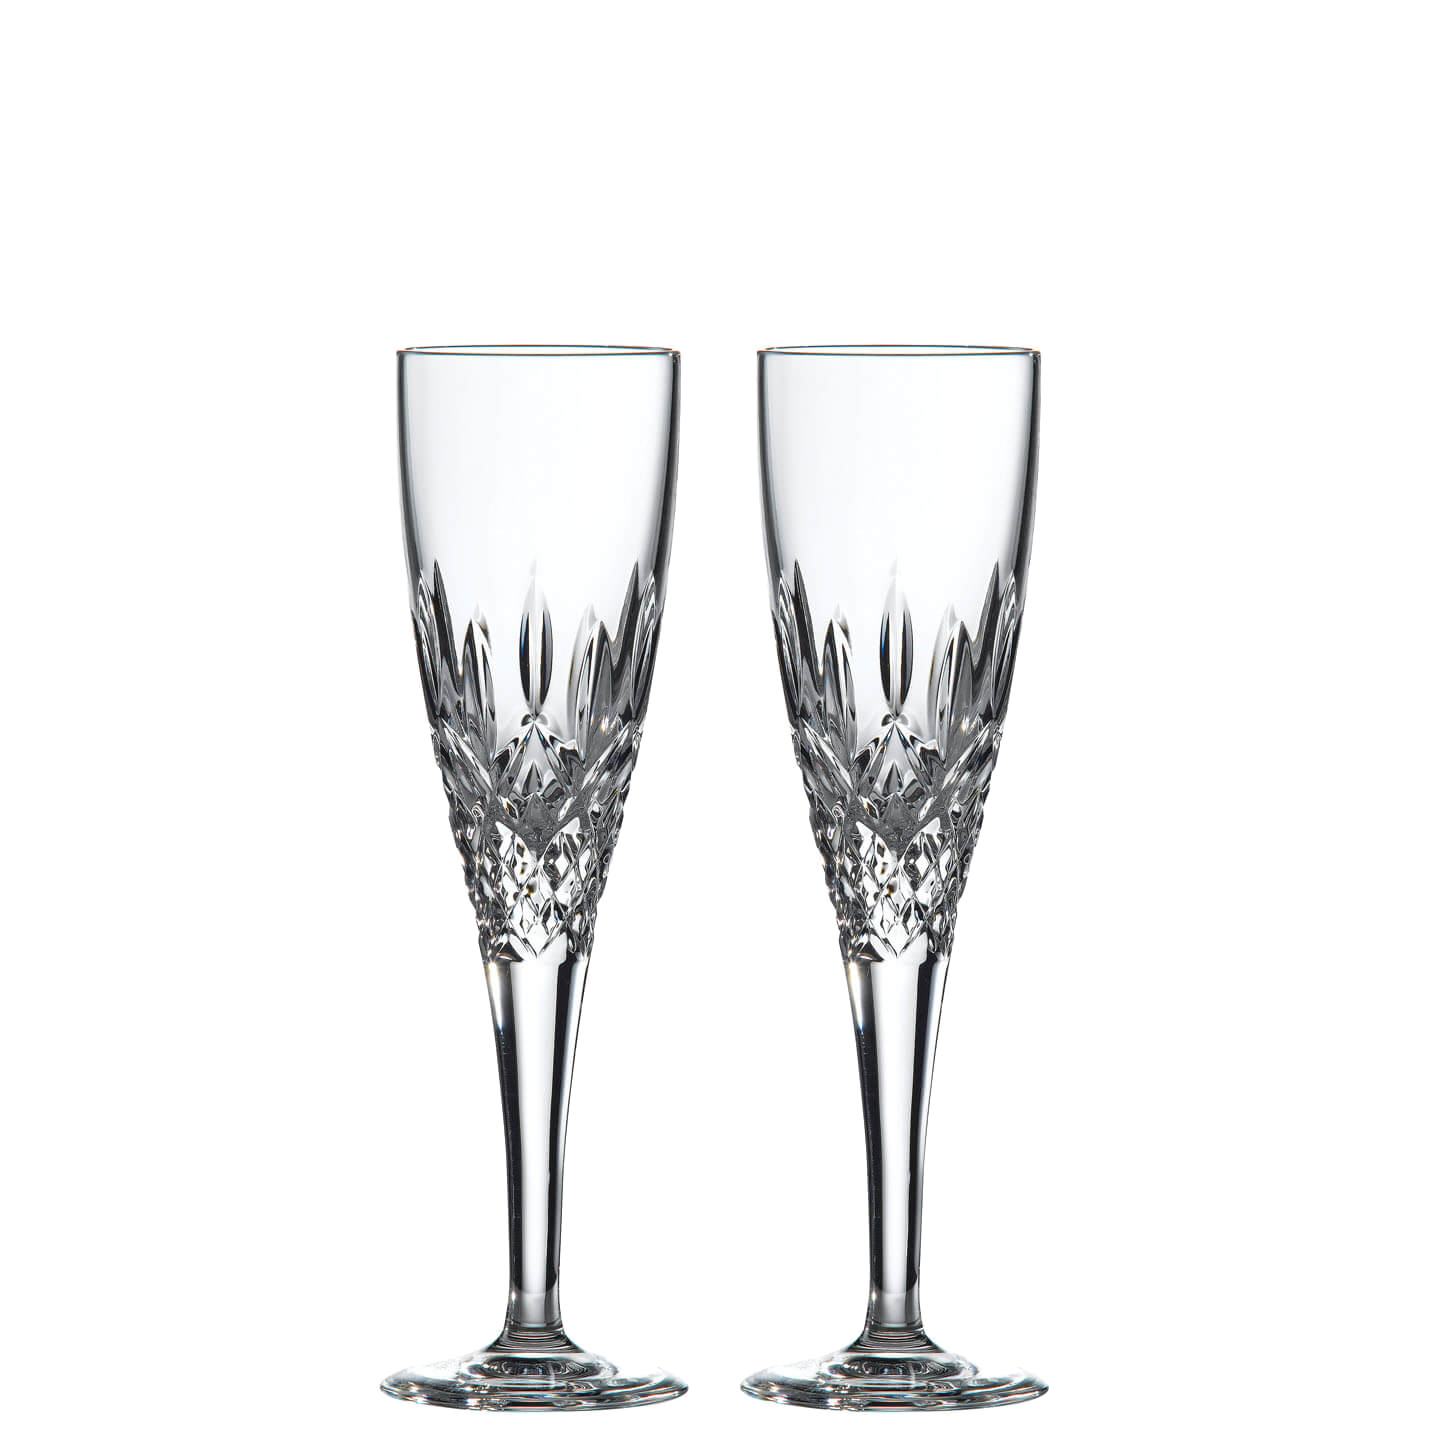 Royal Doulton Highclere Champagne Flute (Set of 2)